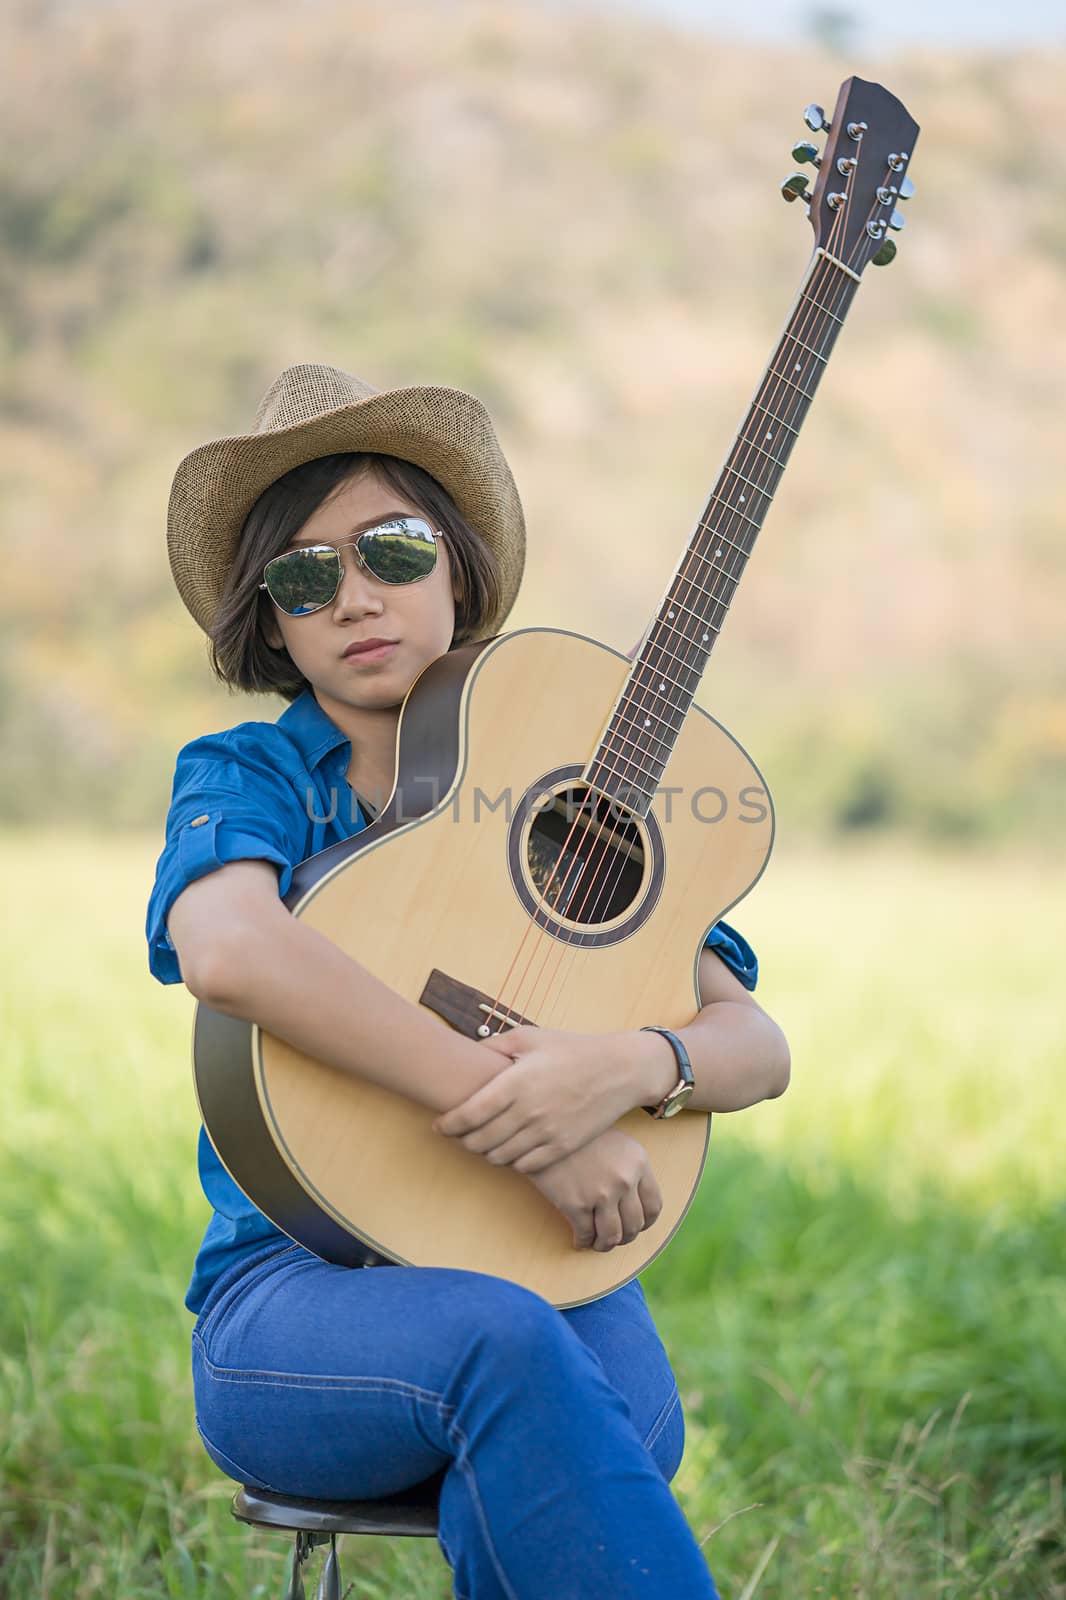 Women short hair wear hat and sunglasses sit playing guitar in g by stoonn